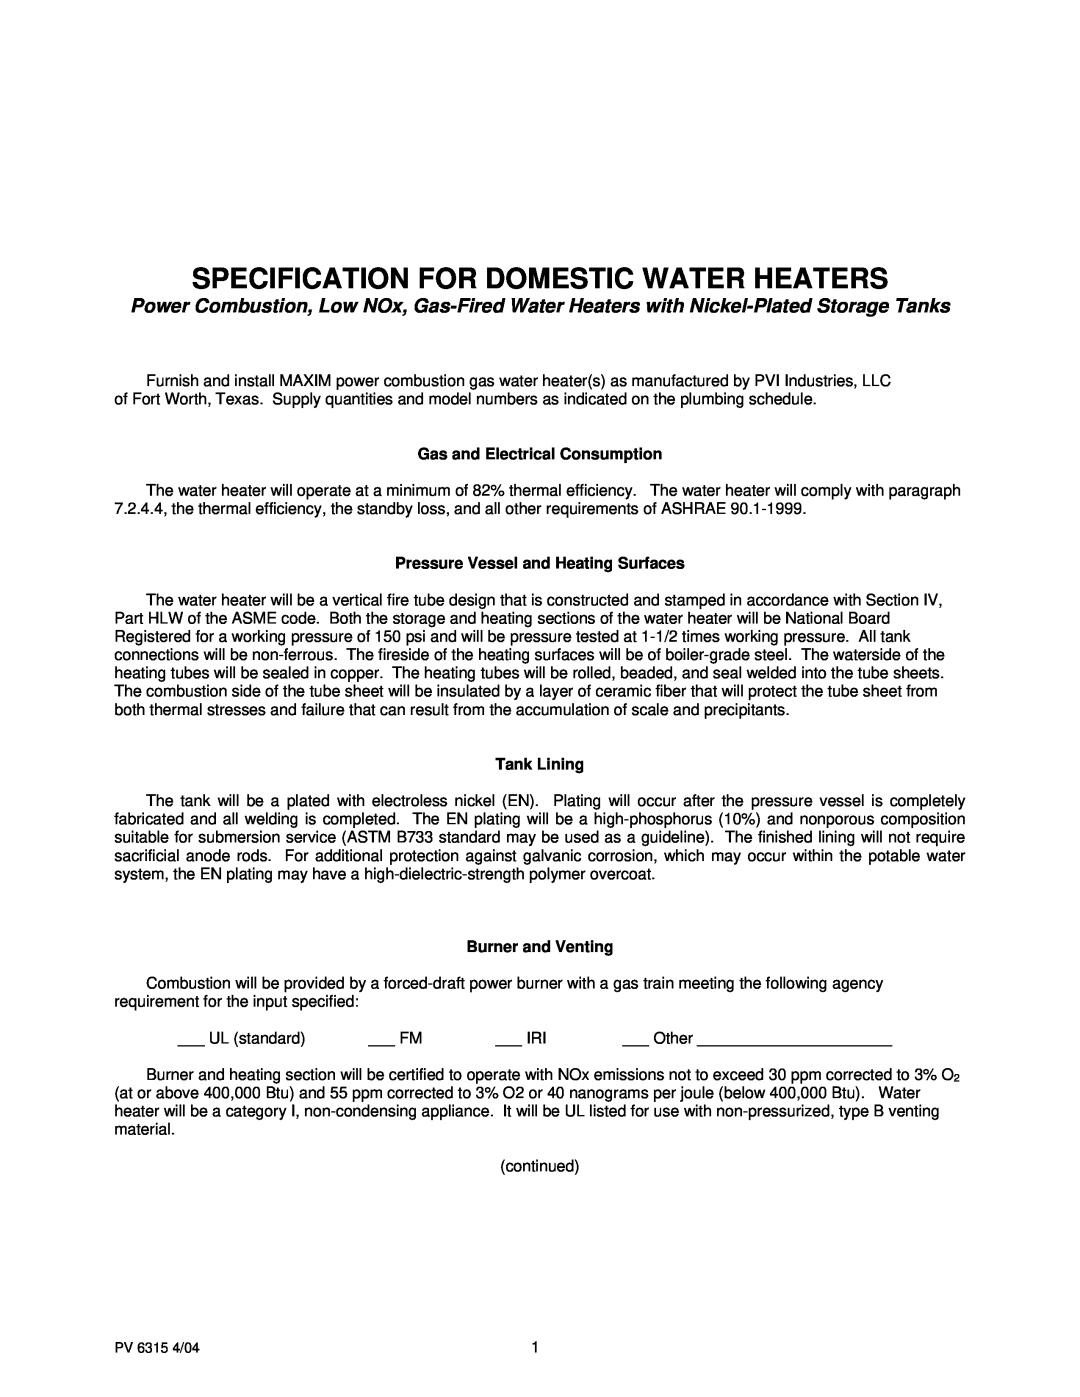 PVI Industries PV 6315 manual Specification For Domestic Water Heaters, Gas and Electrical Consumption, Tank Lining 